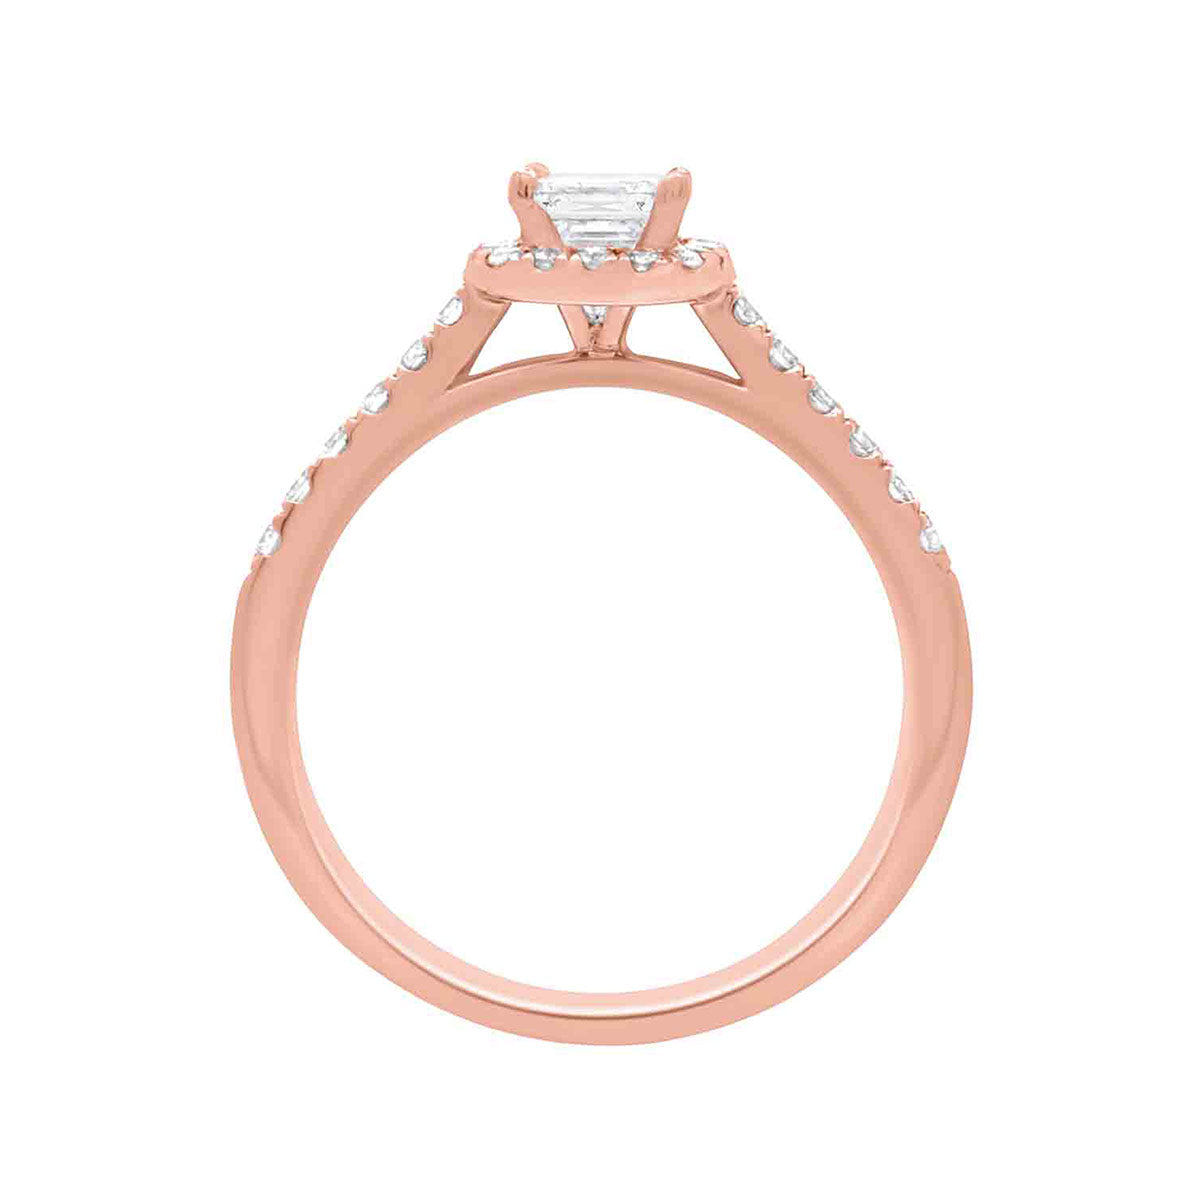 Asscher Halo Diamond Ring in rose gold pictured standing upright